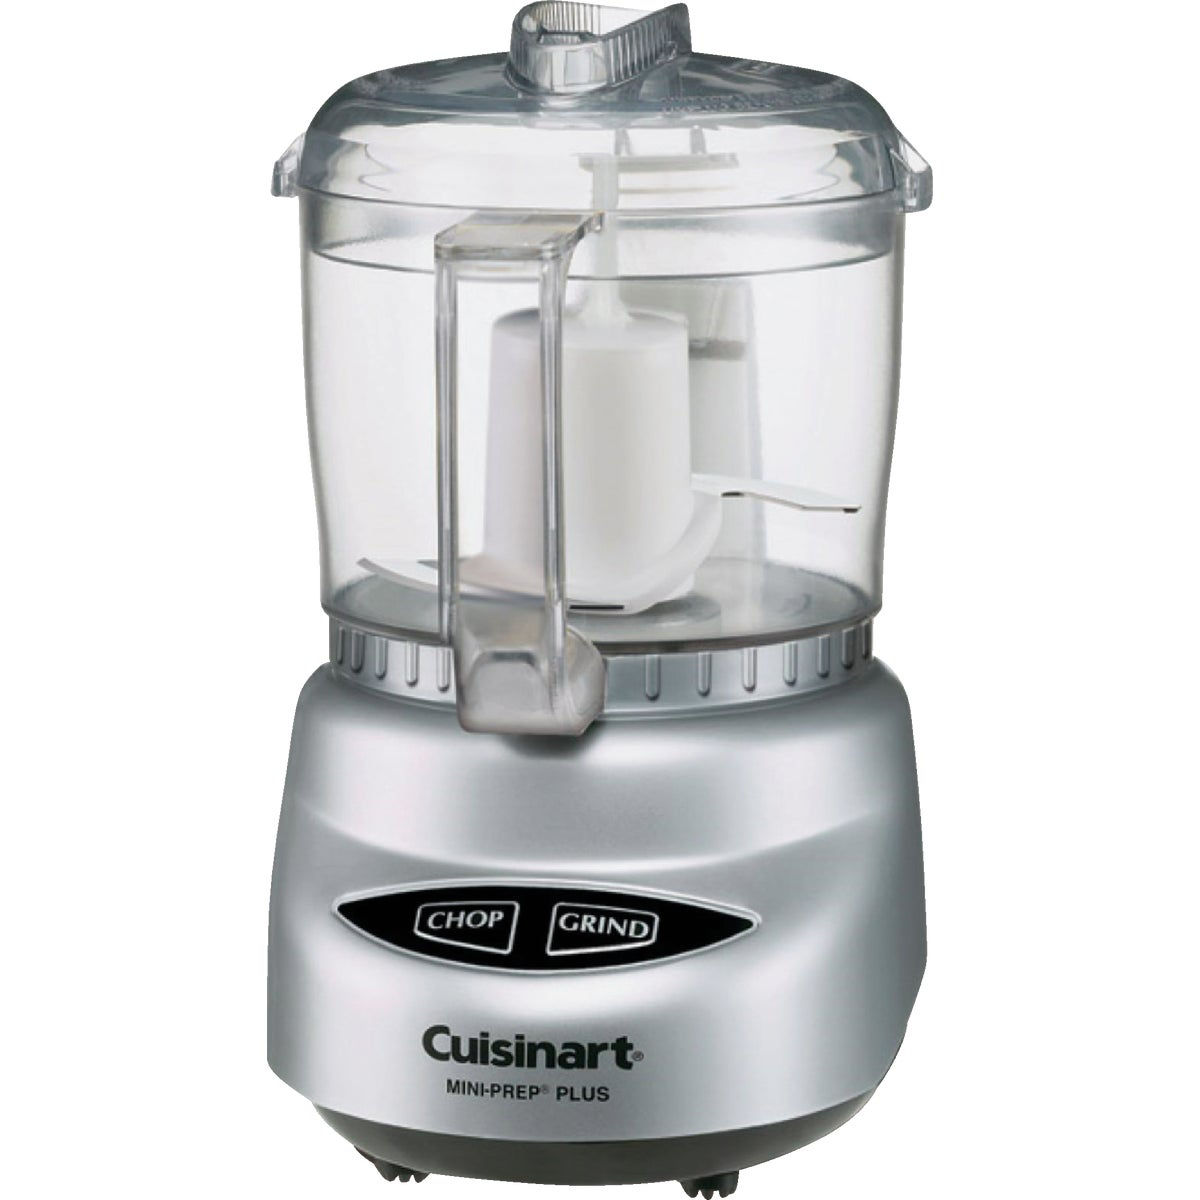 Cuisinart 7 Cups BPA Free. Food Processor FP-7, Color: White